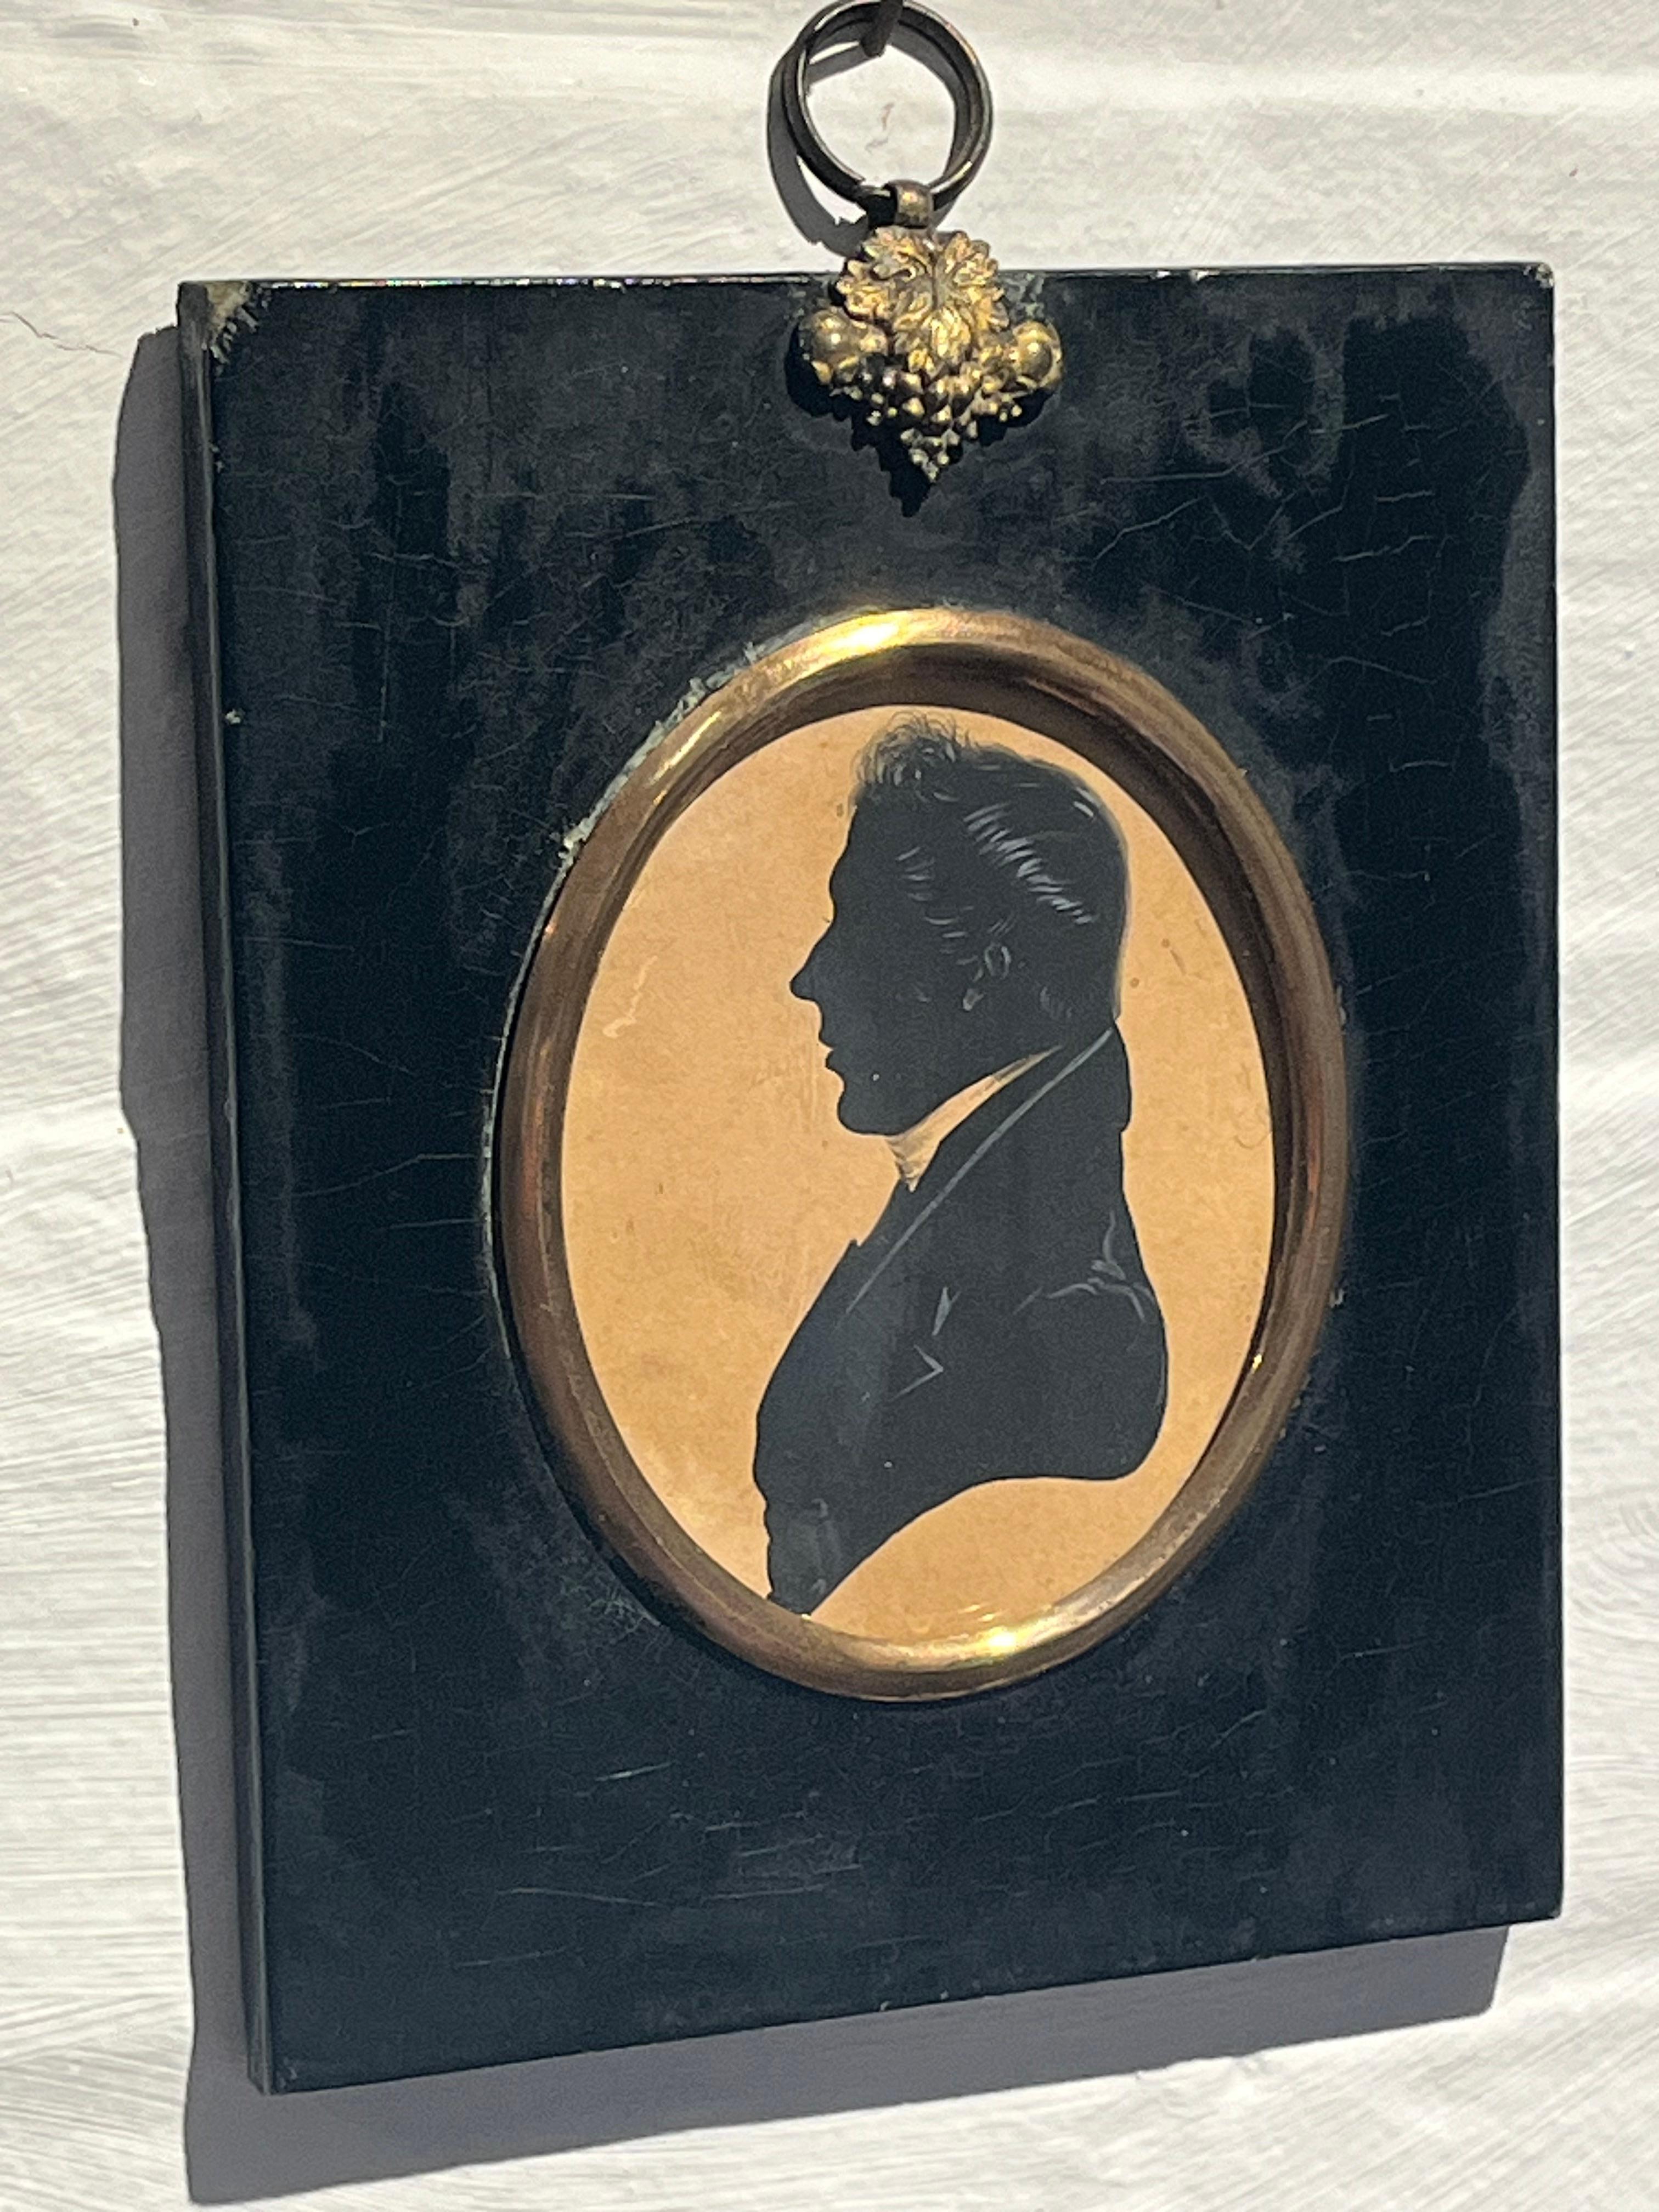 Frederick Frith mid 19th Century English Victorian silhouette portrait For Sale 8